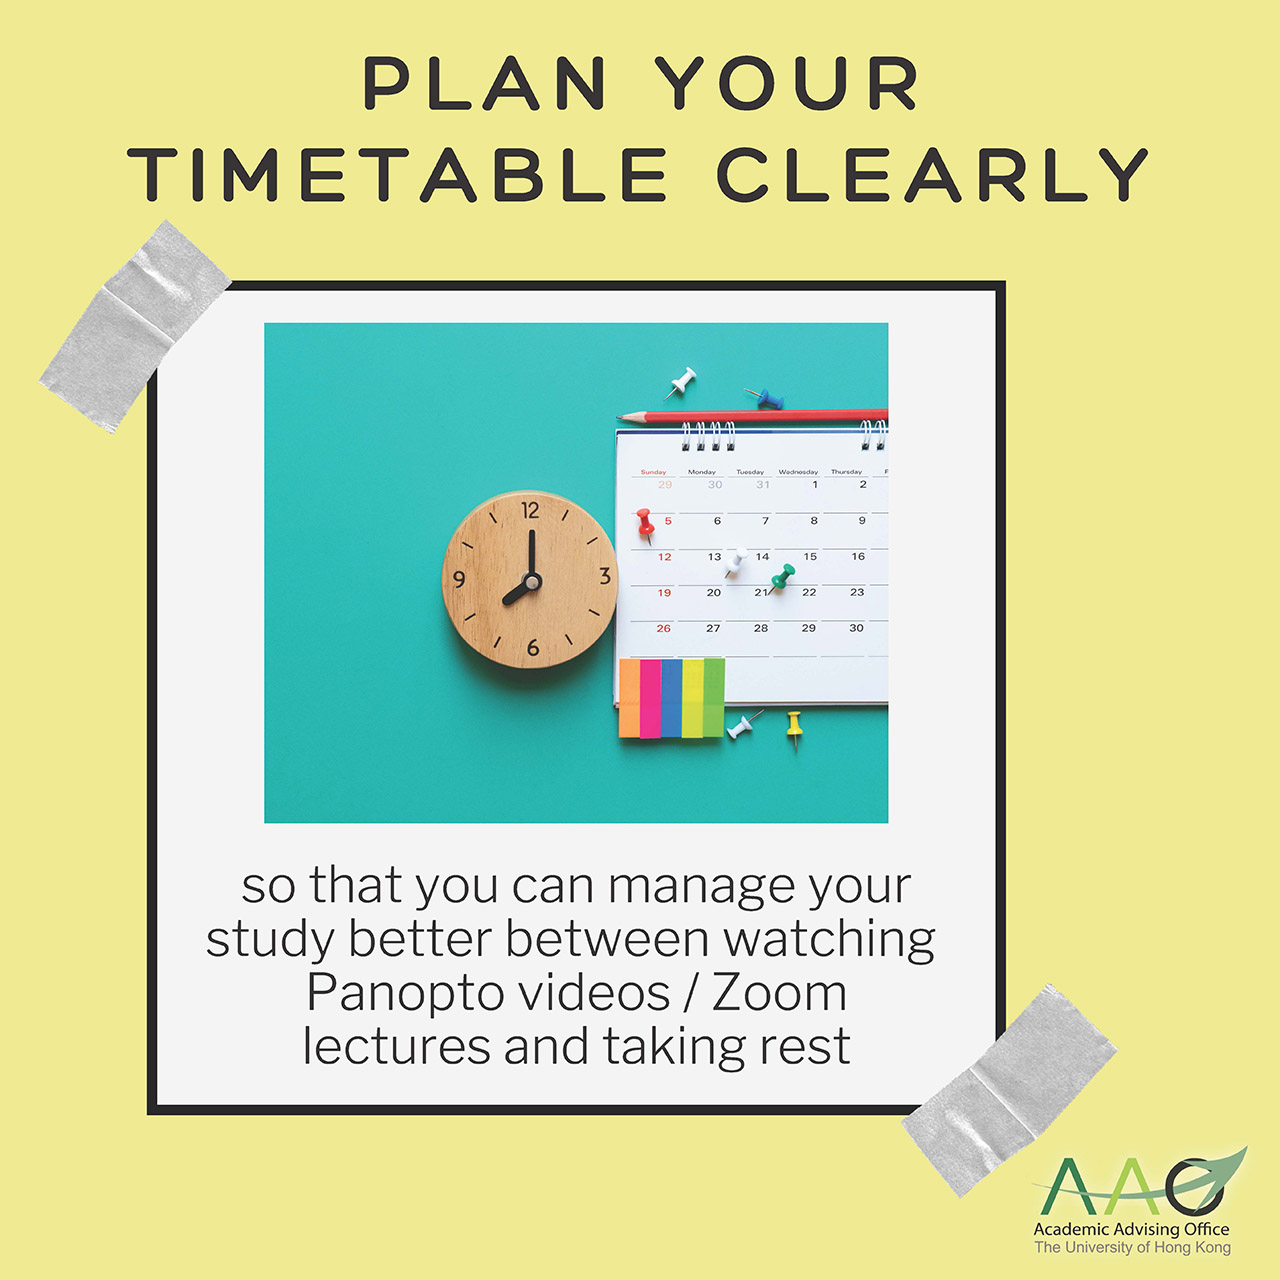 Plan your timetable clearly so that you can manage your study better between watching Panopto videos / Zoom lectures and taking rest